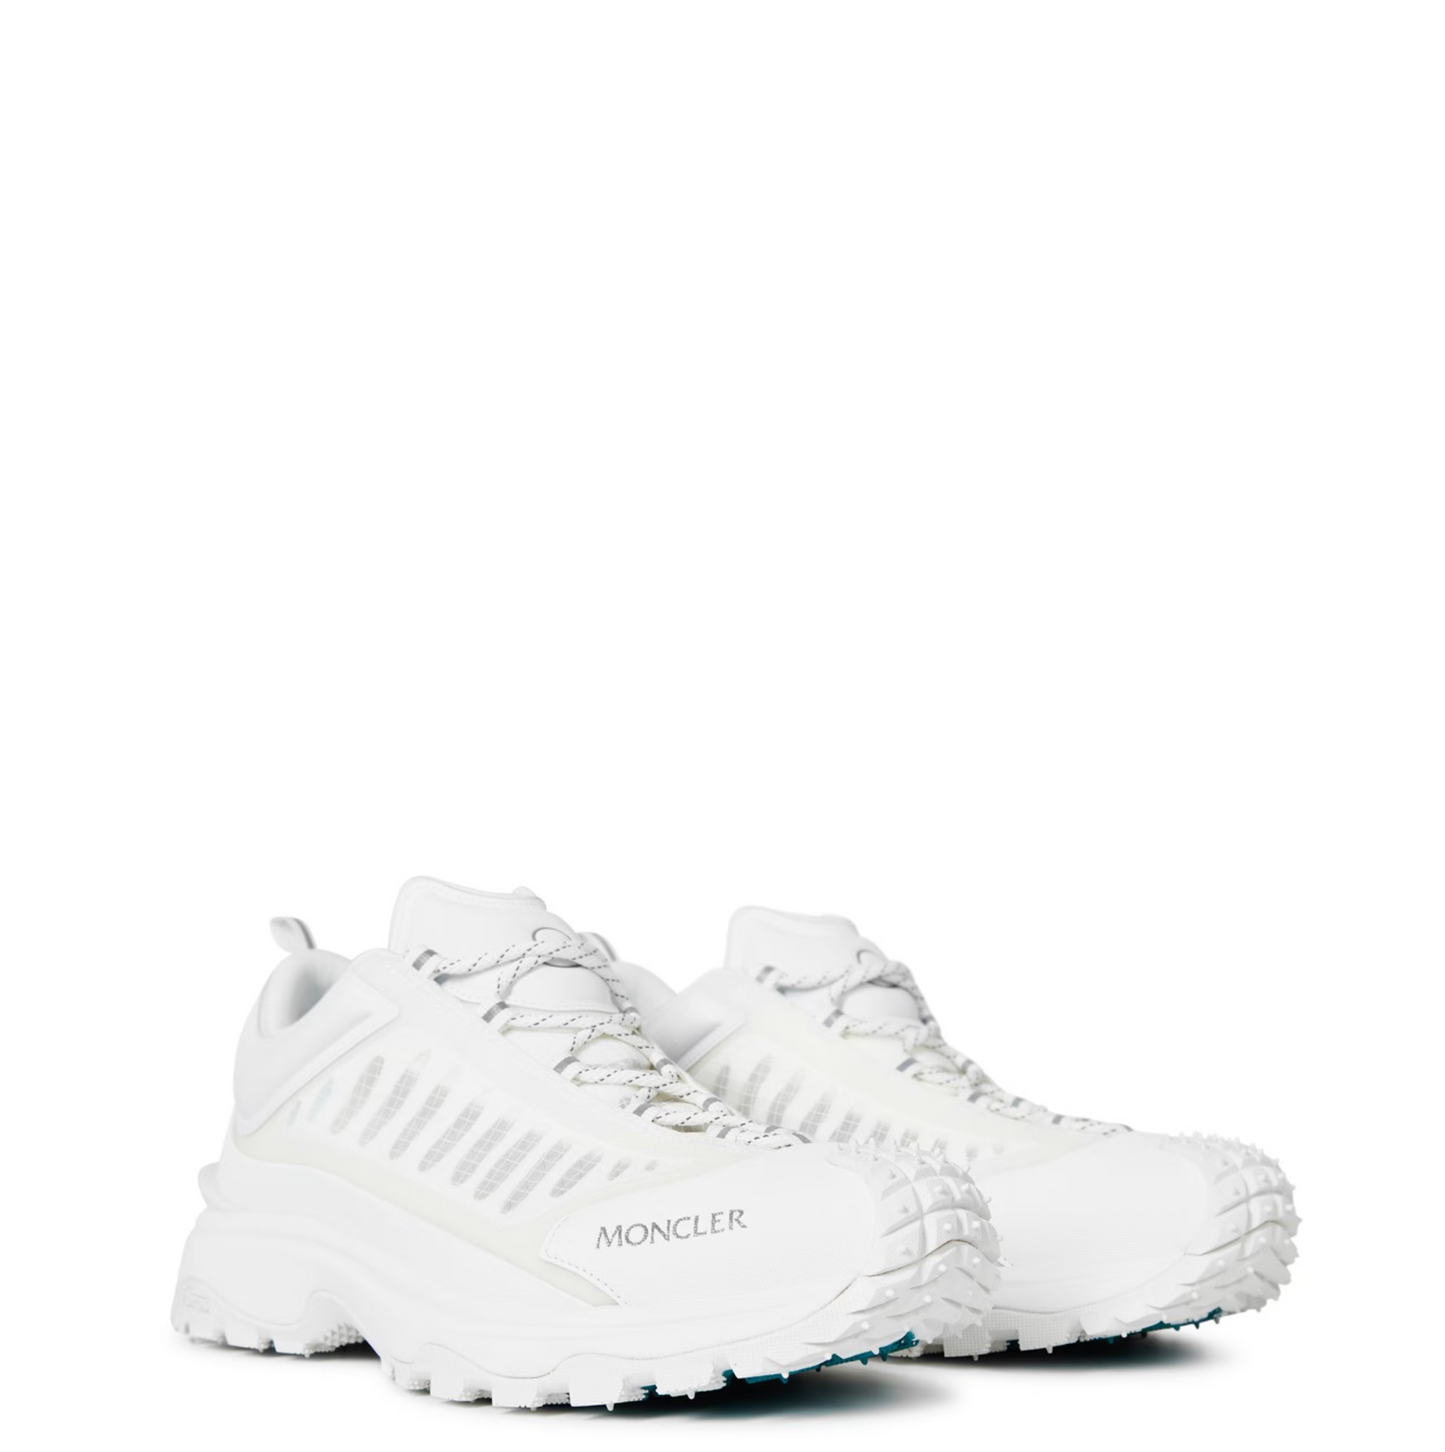 Moncler Trailgrip White Trainers - DANYOUNGUK